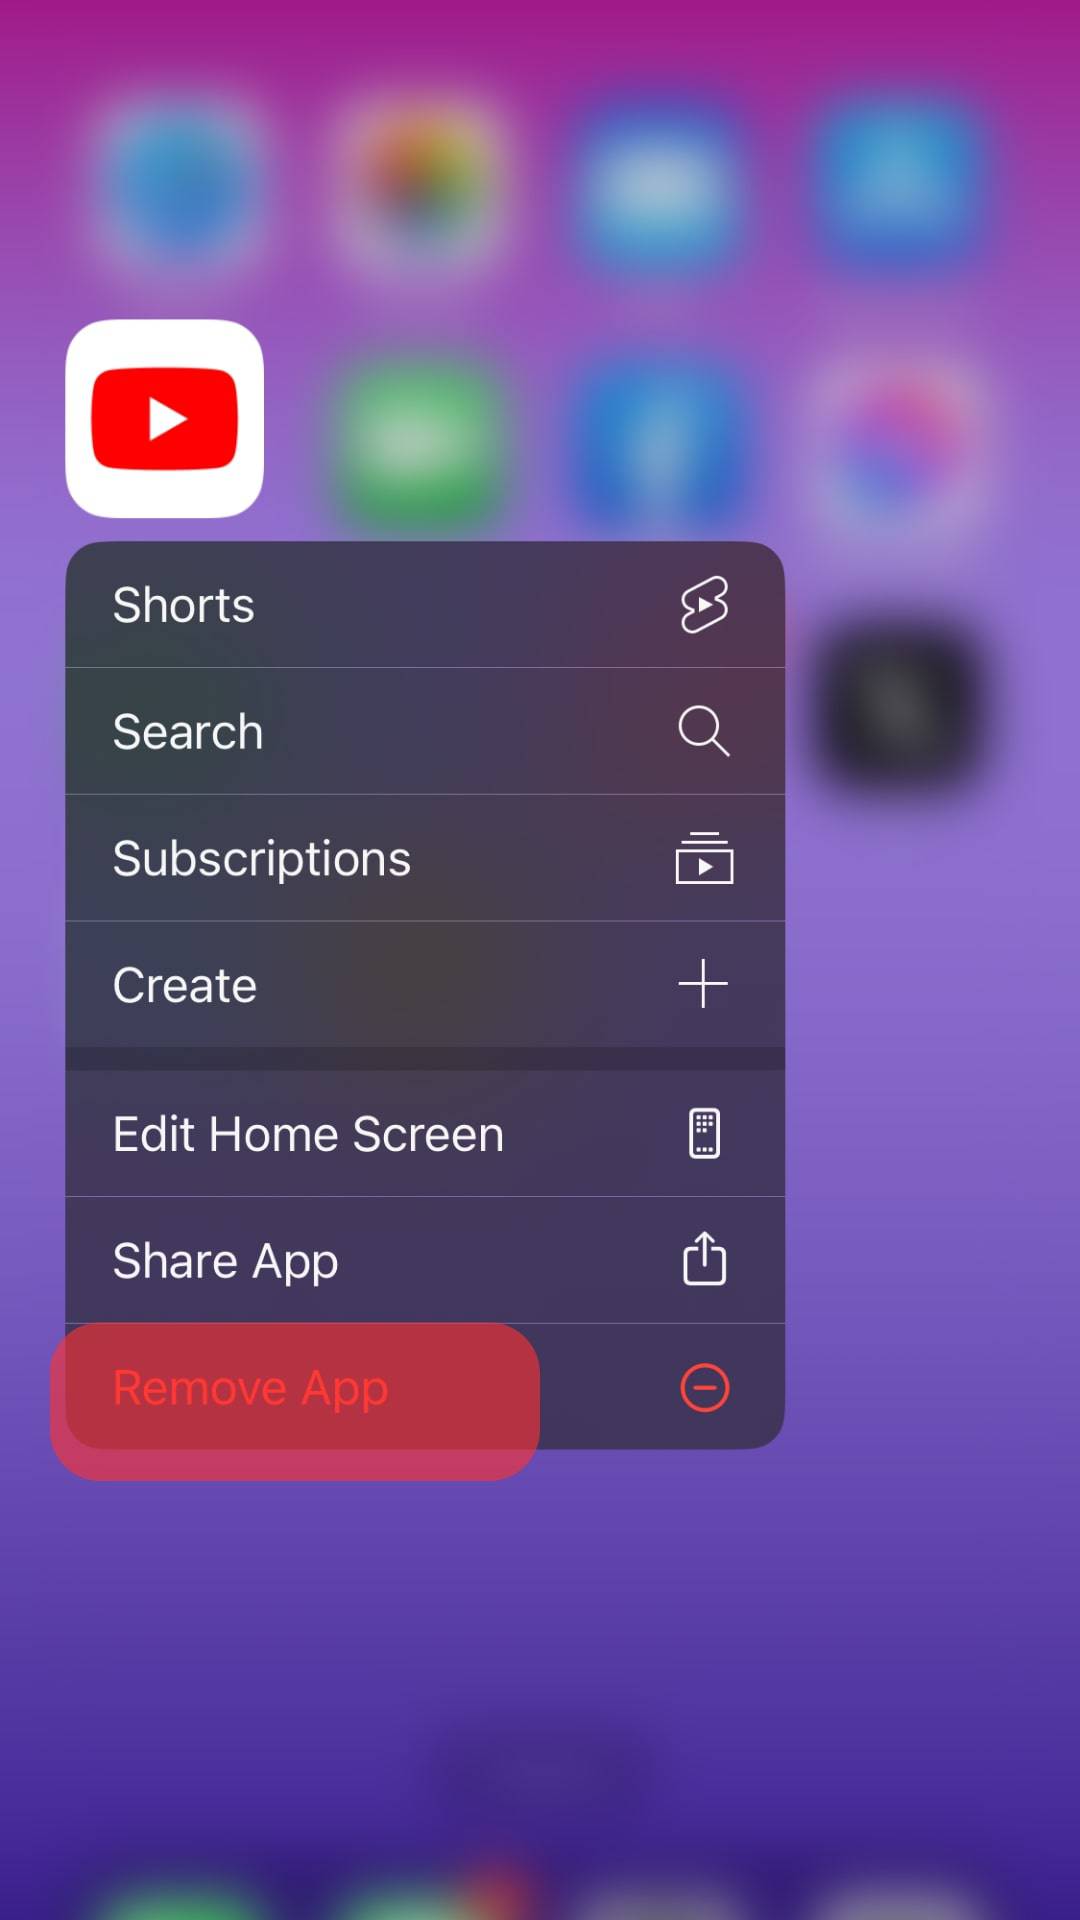 Long-Press On It And Tap The Remove App Button.